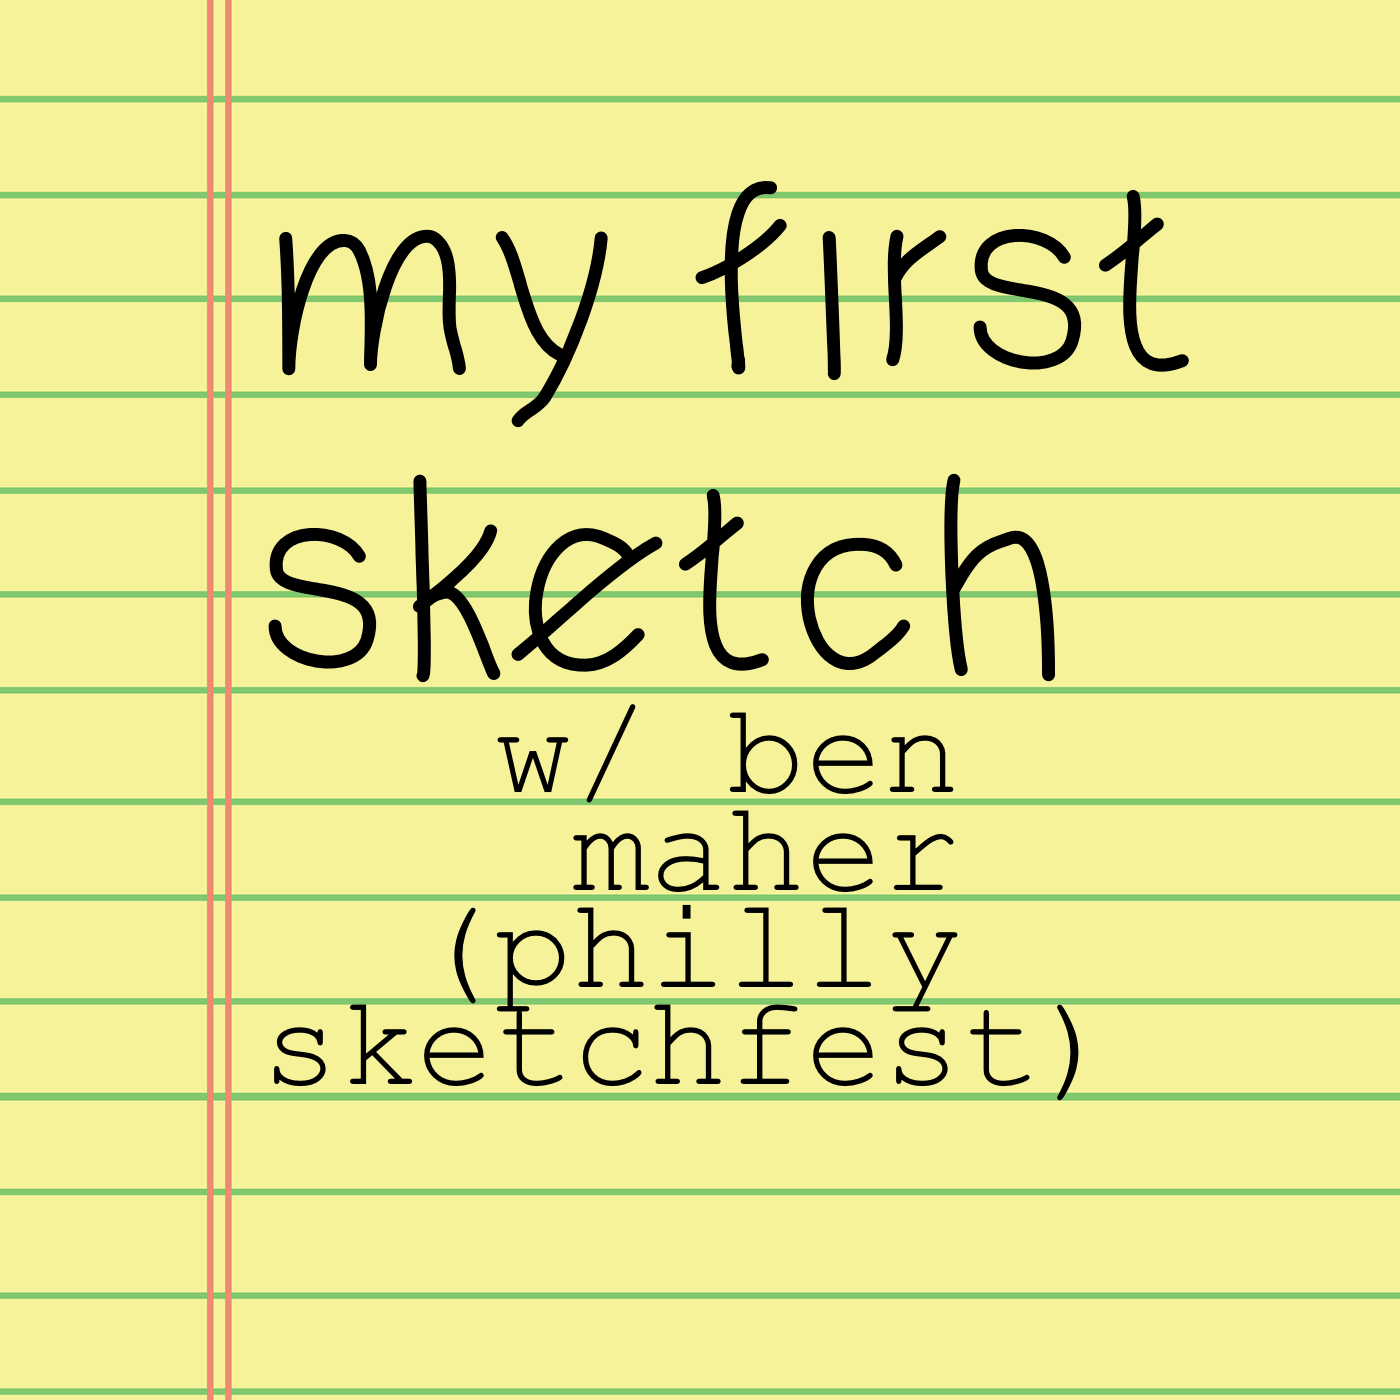 the My First Sketch logo on yellow lined pager with "With Ben Maher (Philly Sketchfest)"